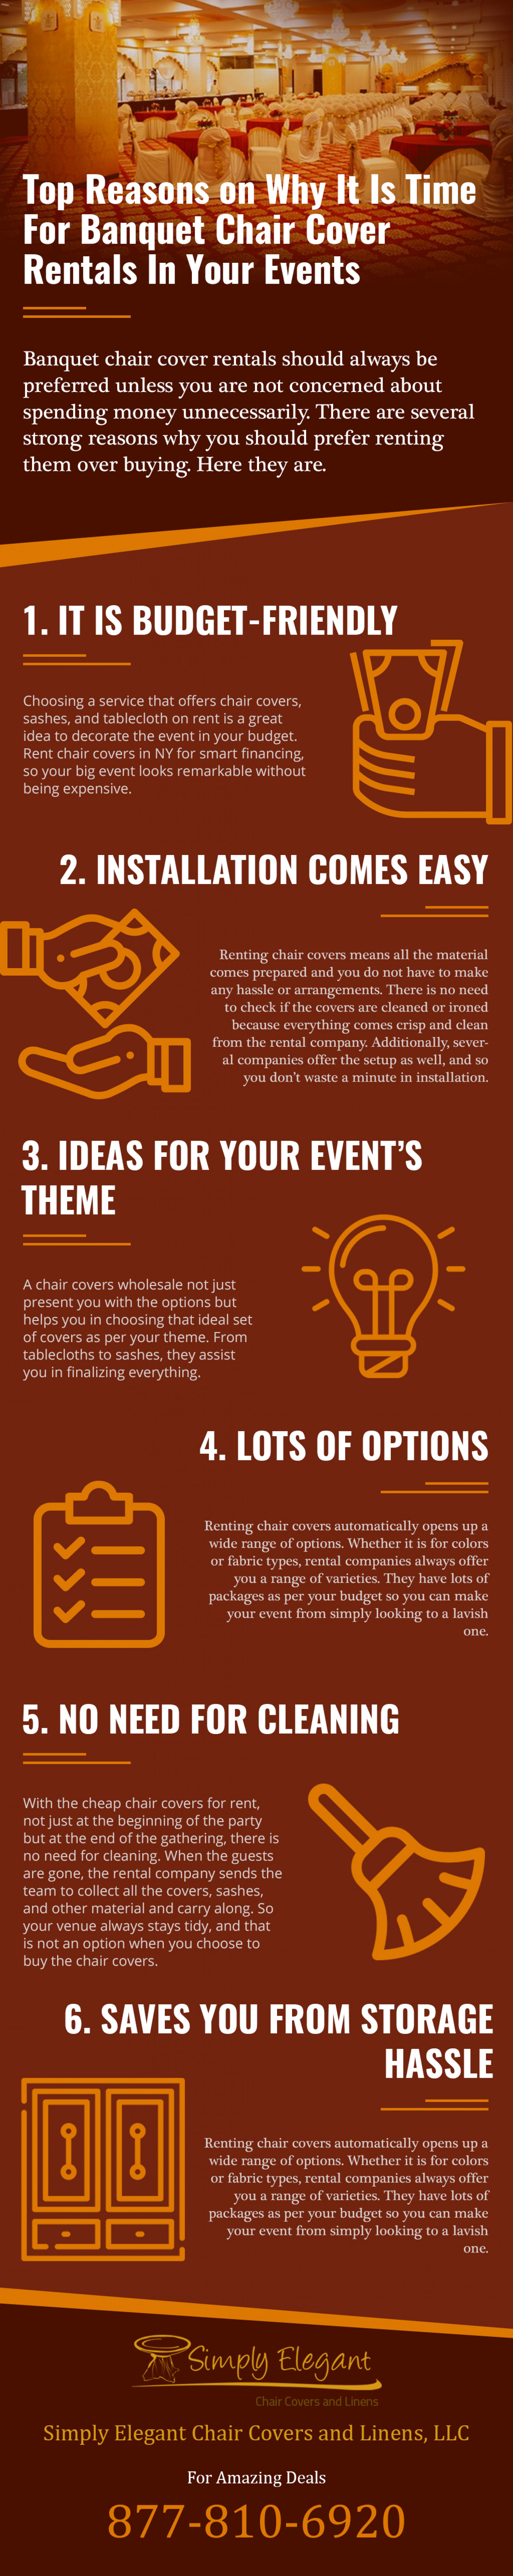 Top Reasons on Why It Is Time for Banquet Chair Cover Rentals in Your Events Infographic